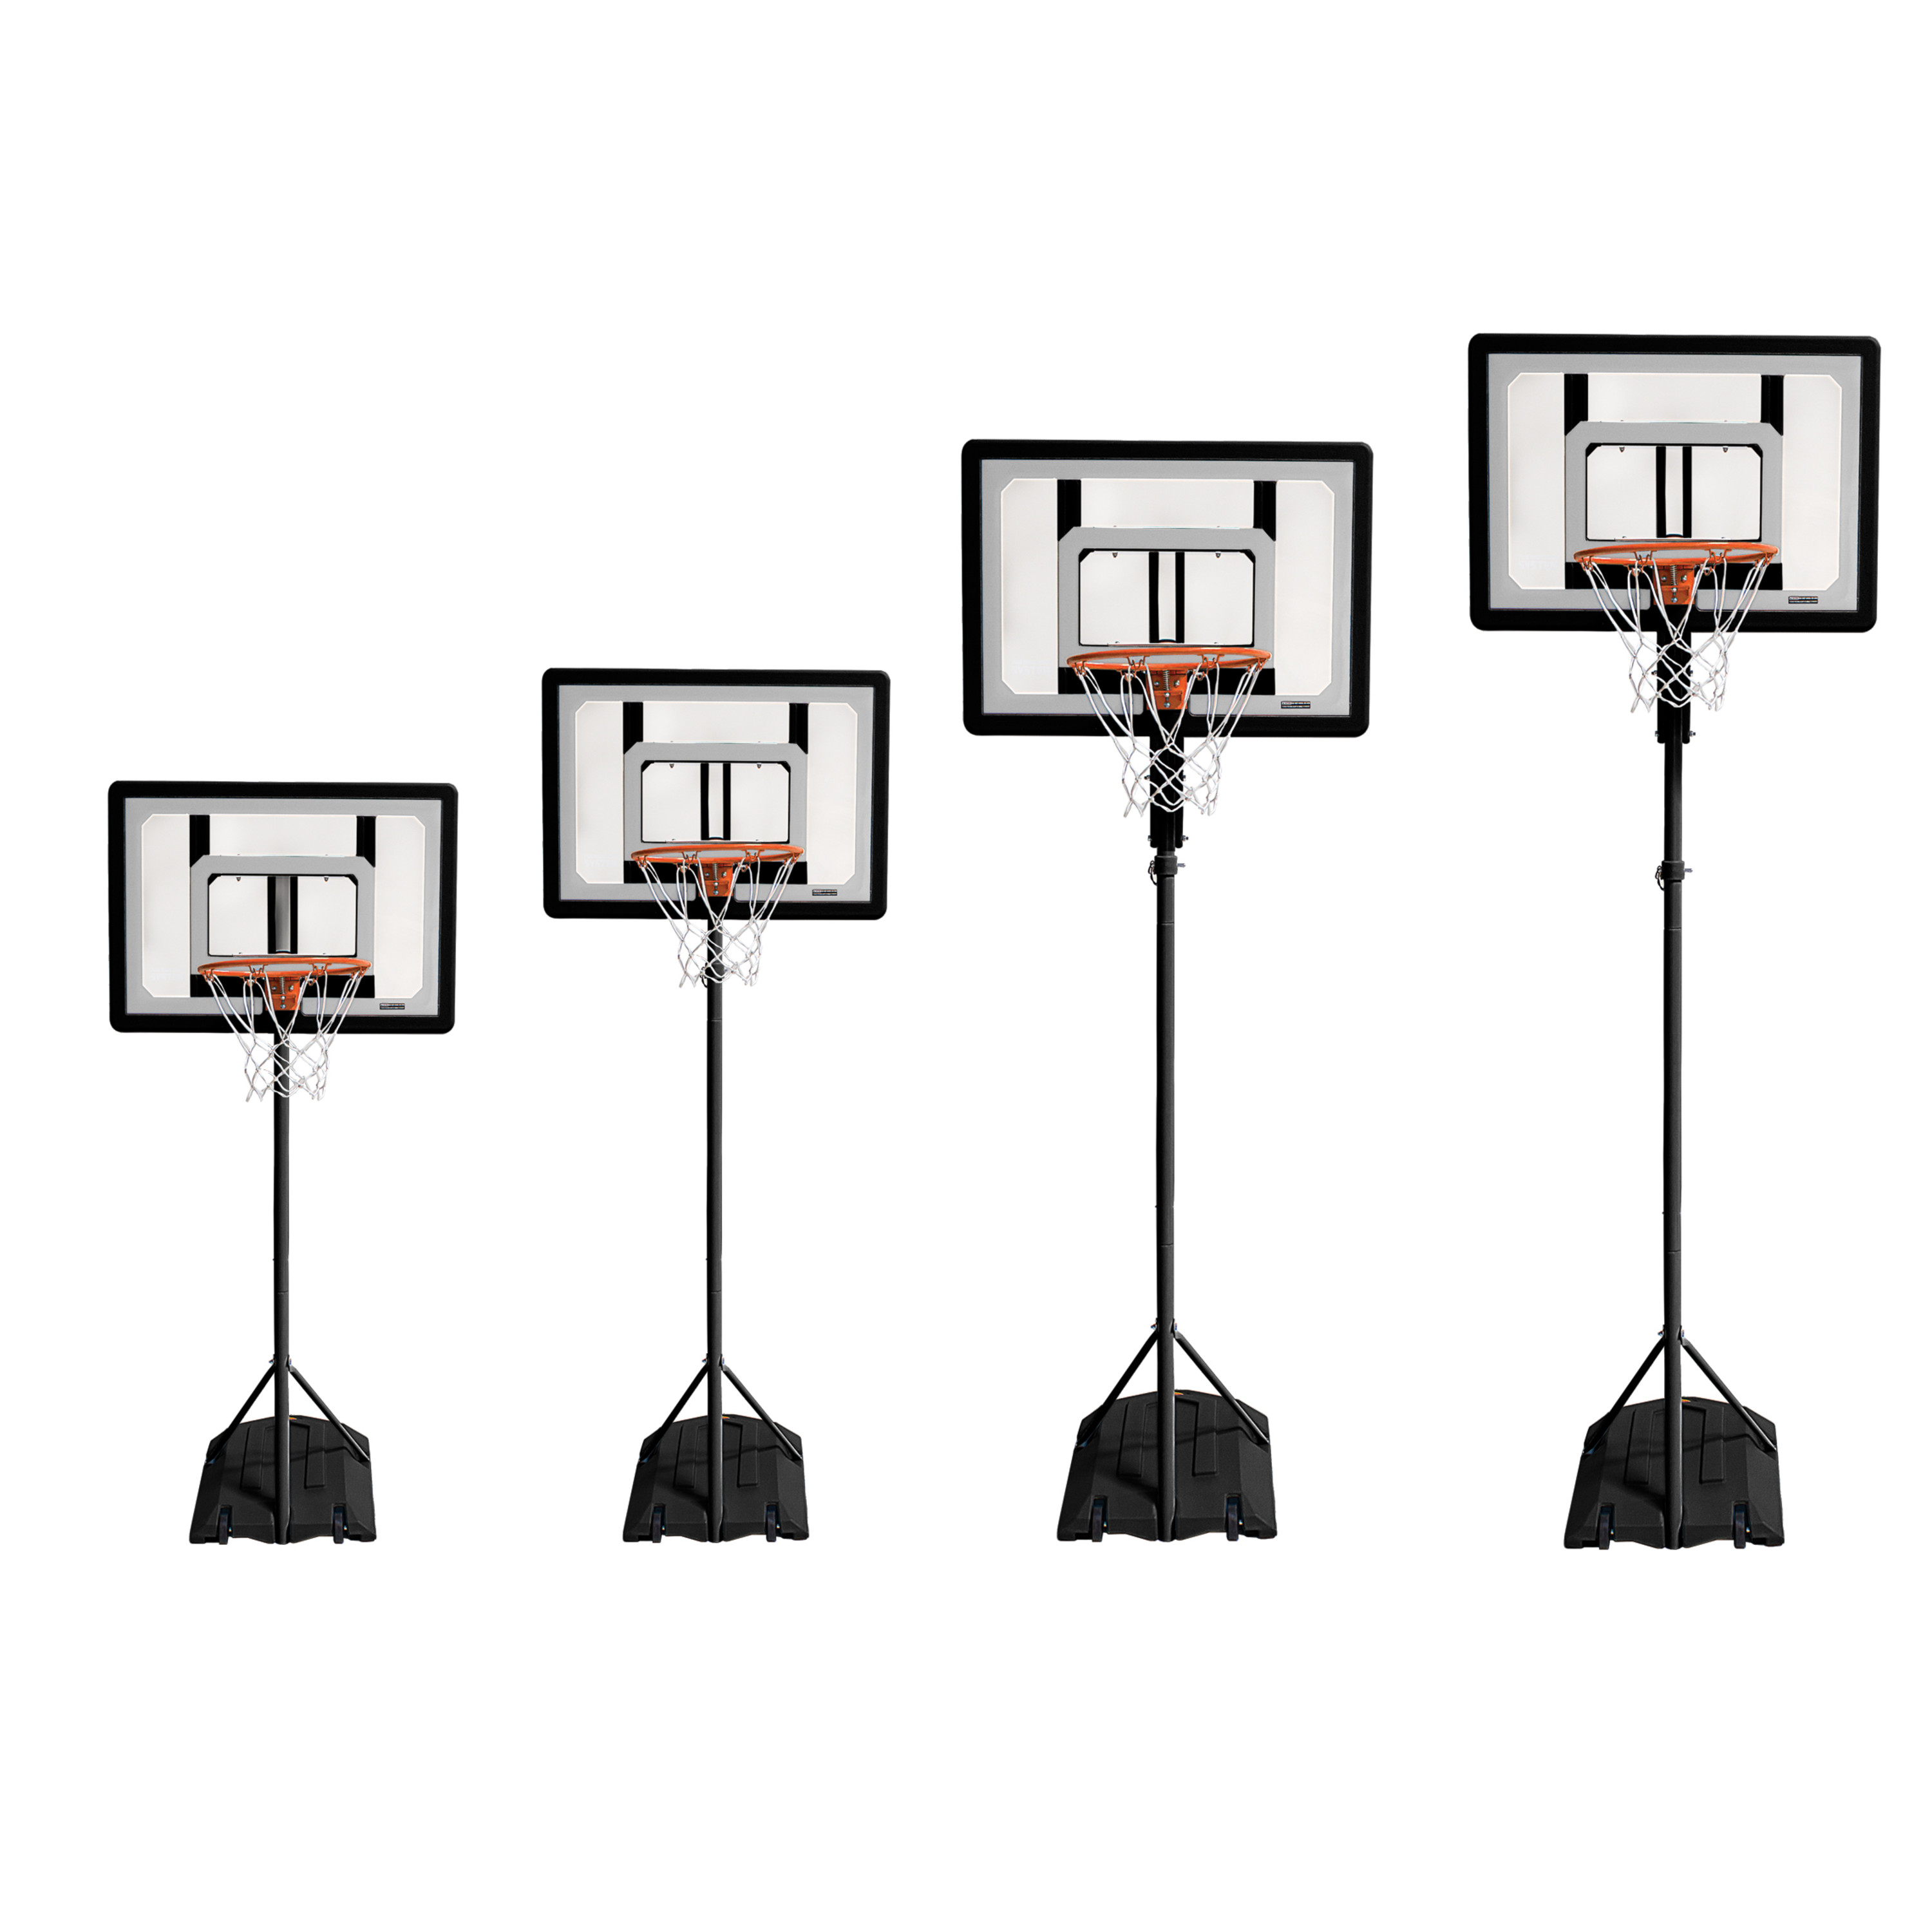 SKLZ Pro Mini Portable Basketball System Hoop with Adjustable Height 3.5 to 7 Ft., Includes 7 In. Mini Ball - image 4 of 12